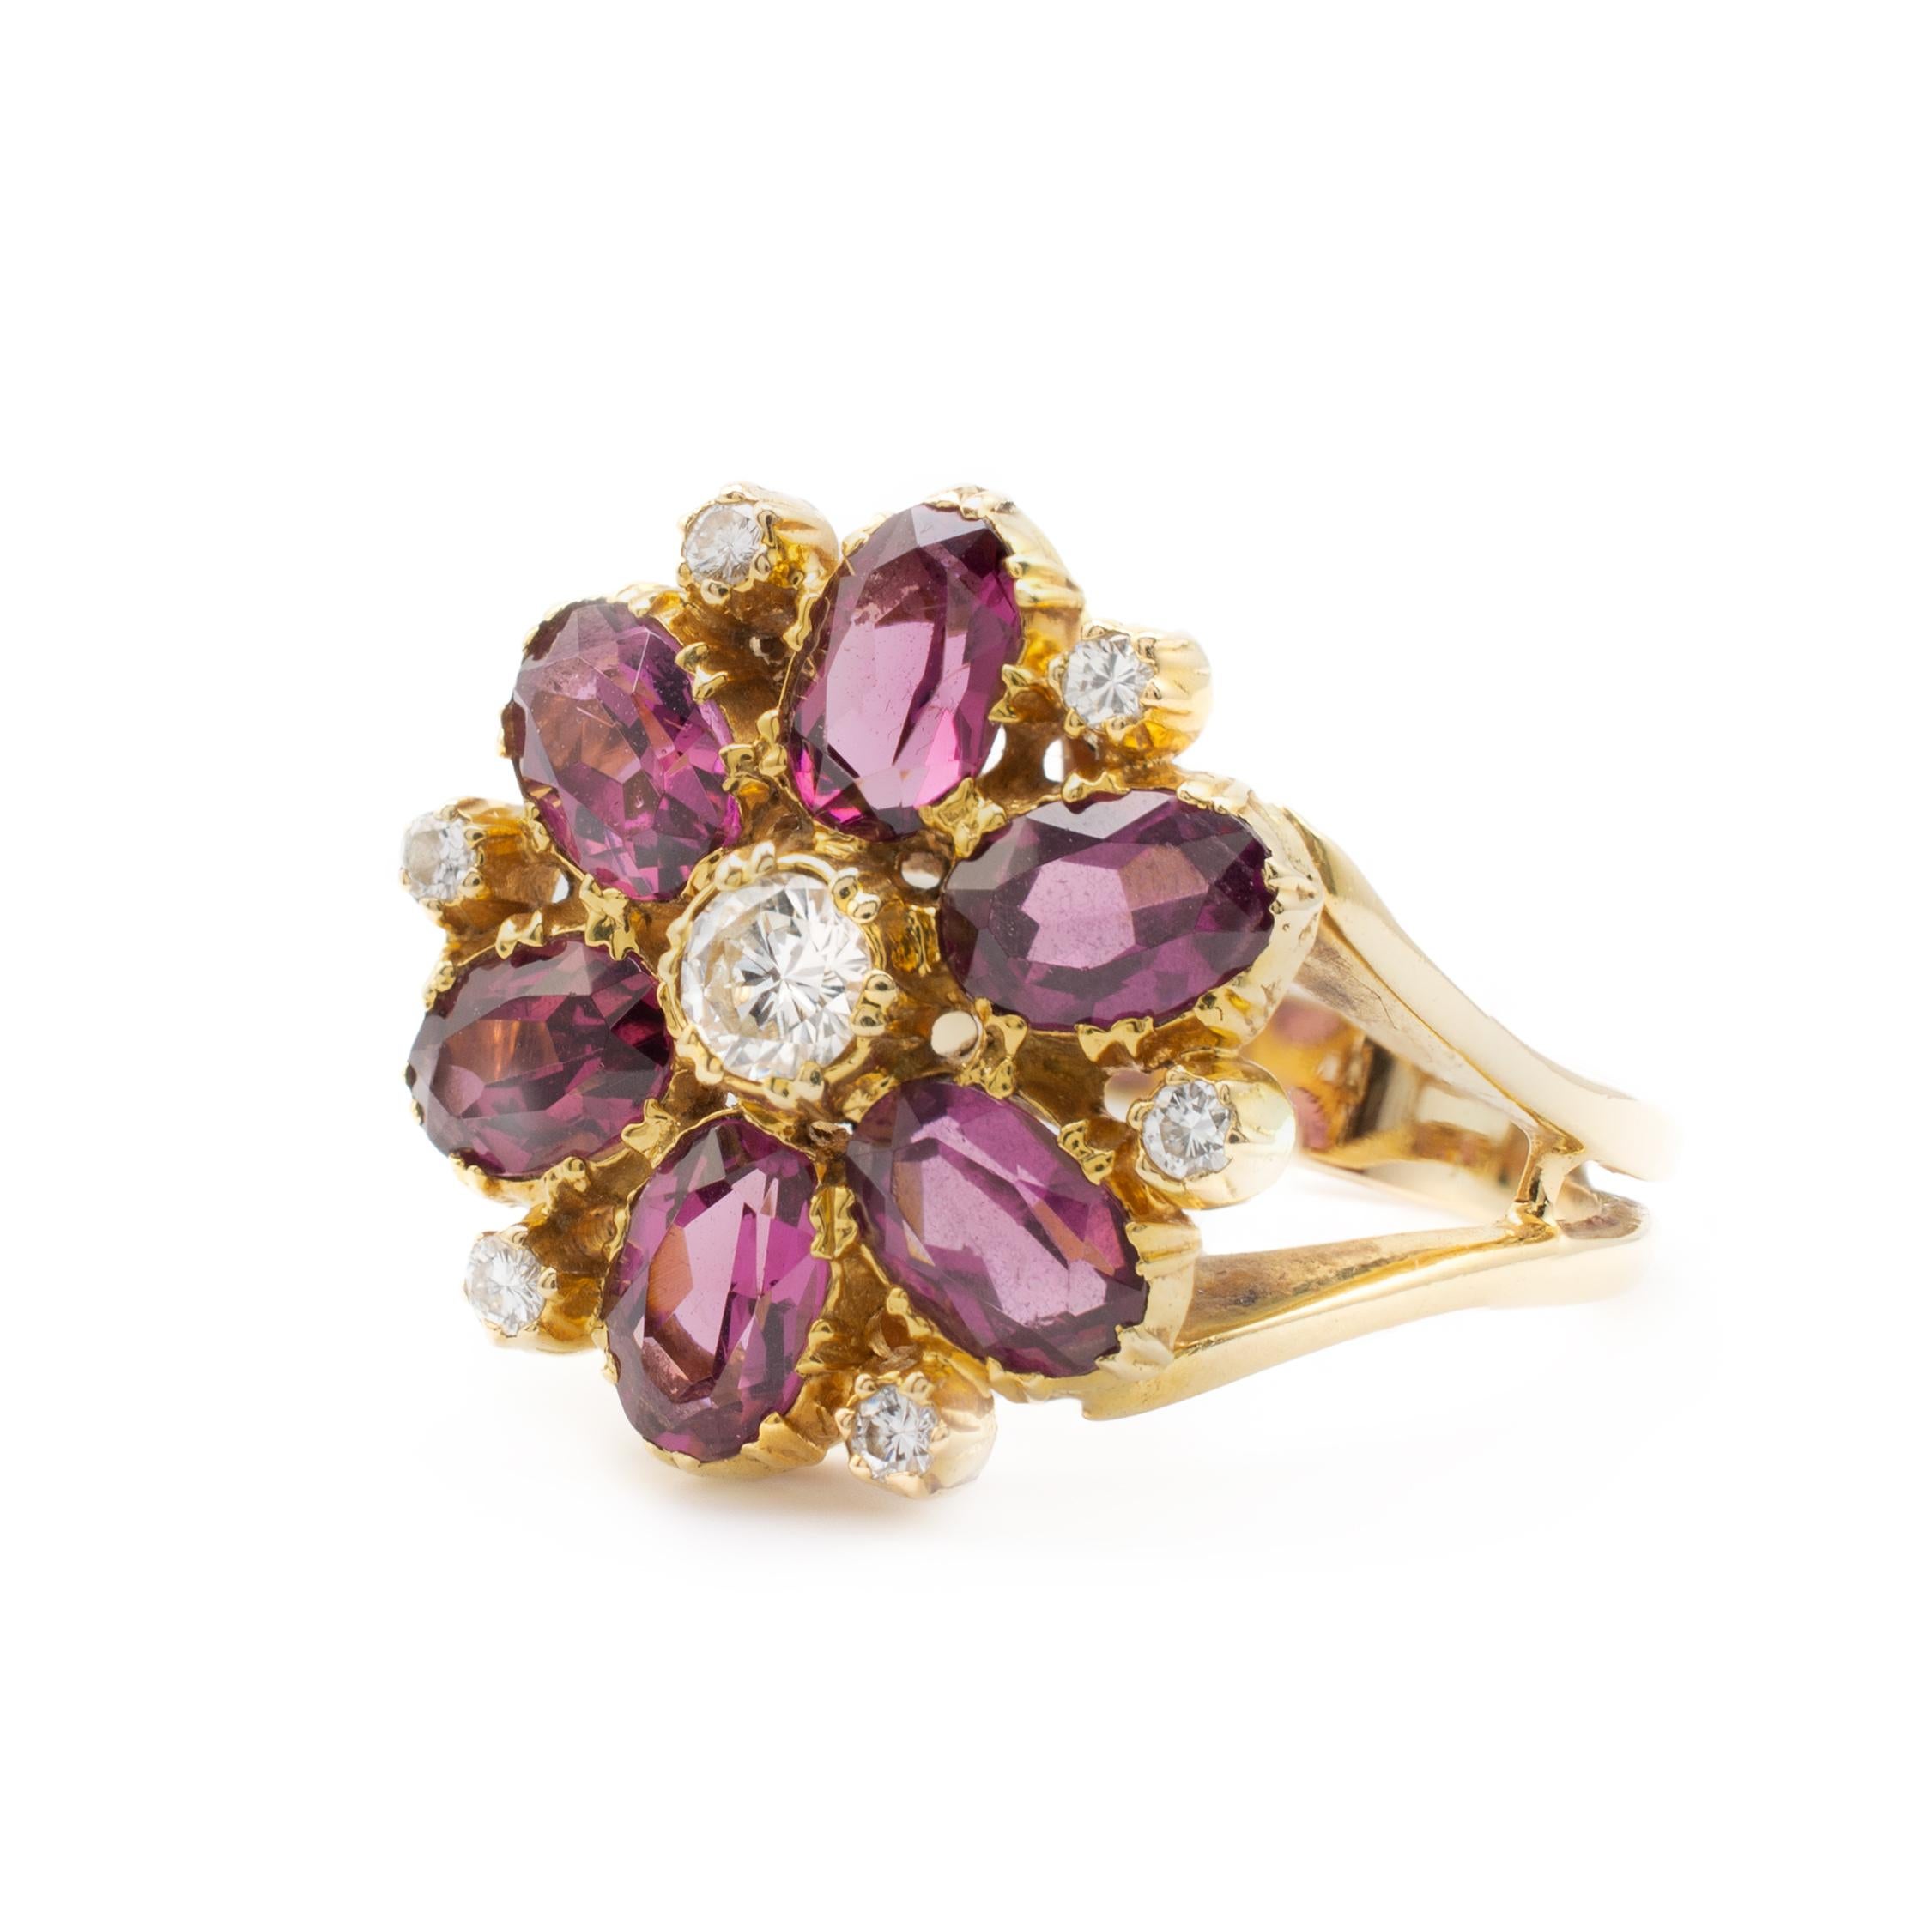 This gorgeous rhodolite garnet and diamond flower cluster cocktail ring crafted is in 18 karat yellow gold and displays a center set diamond with a surround of oval cut rhodolite garnets and smaller diamonds between to form a beautiful flower.